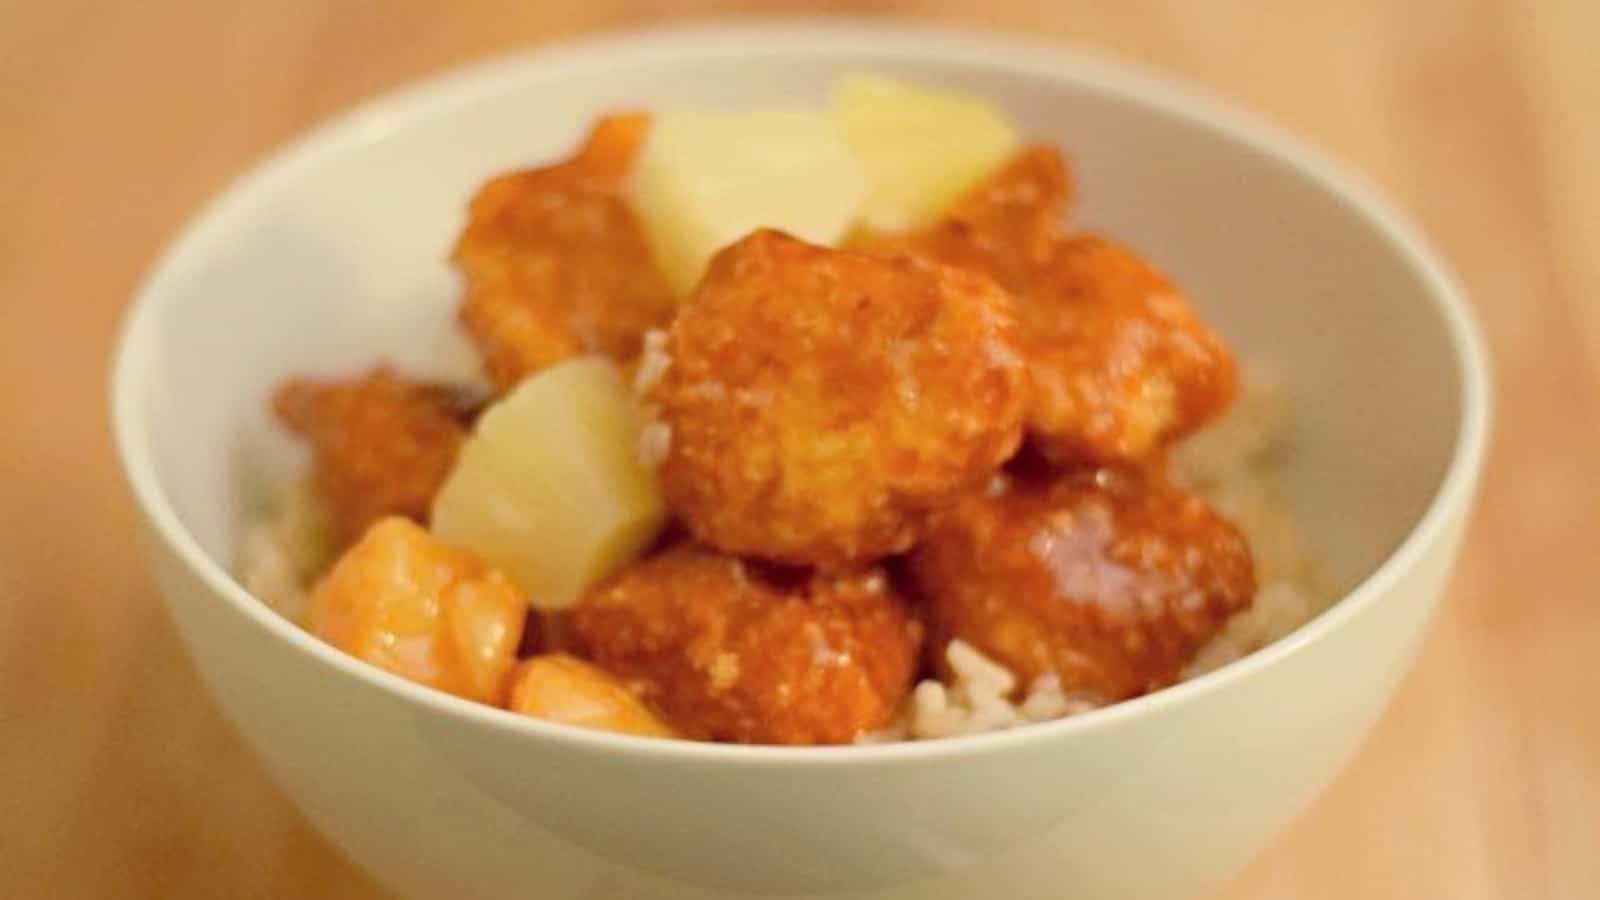 Image shows a Bowl of baked sweet and sour chicken with pineapple.